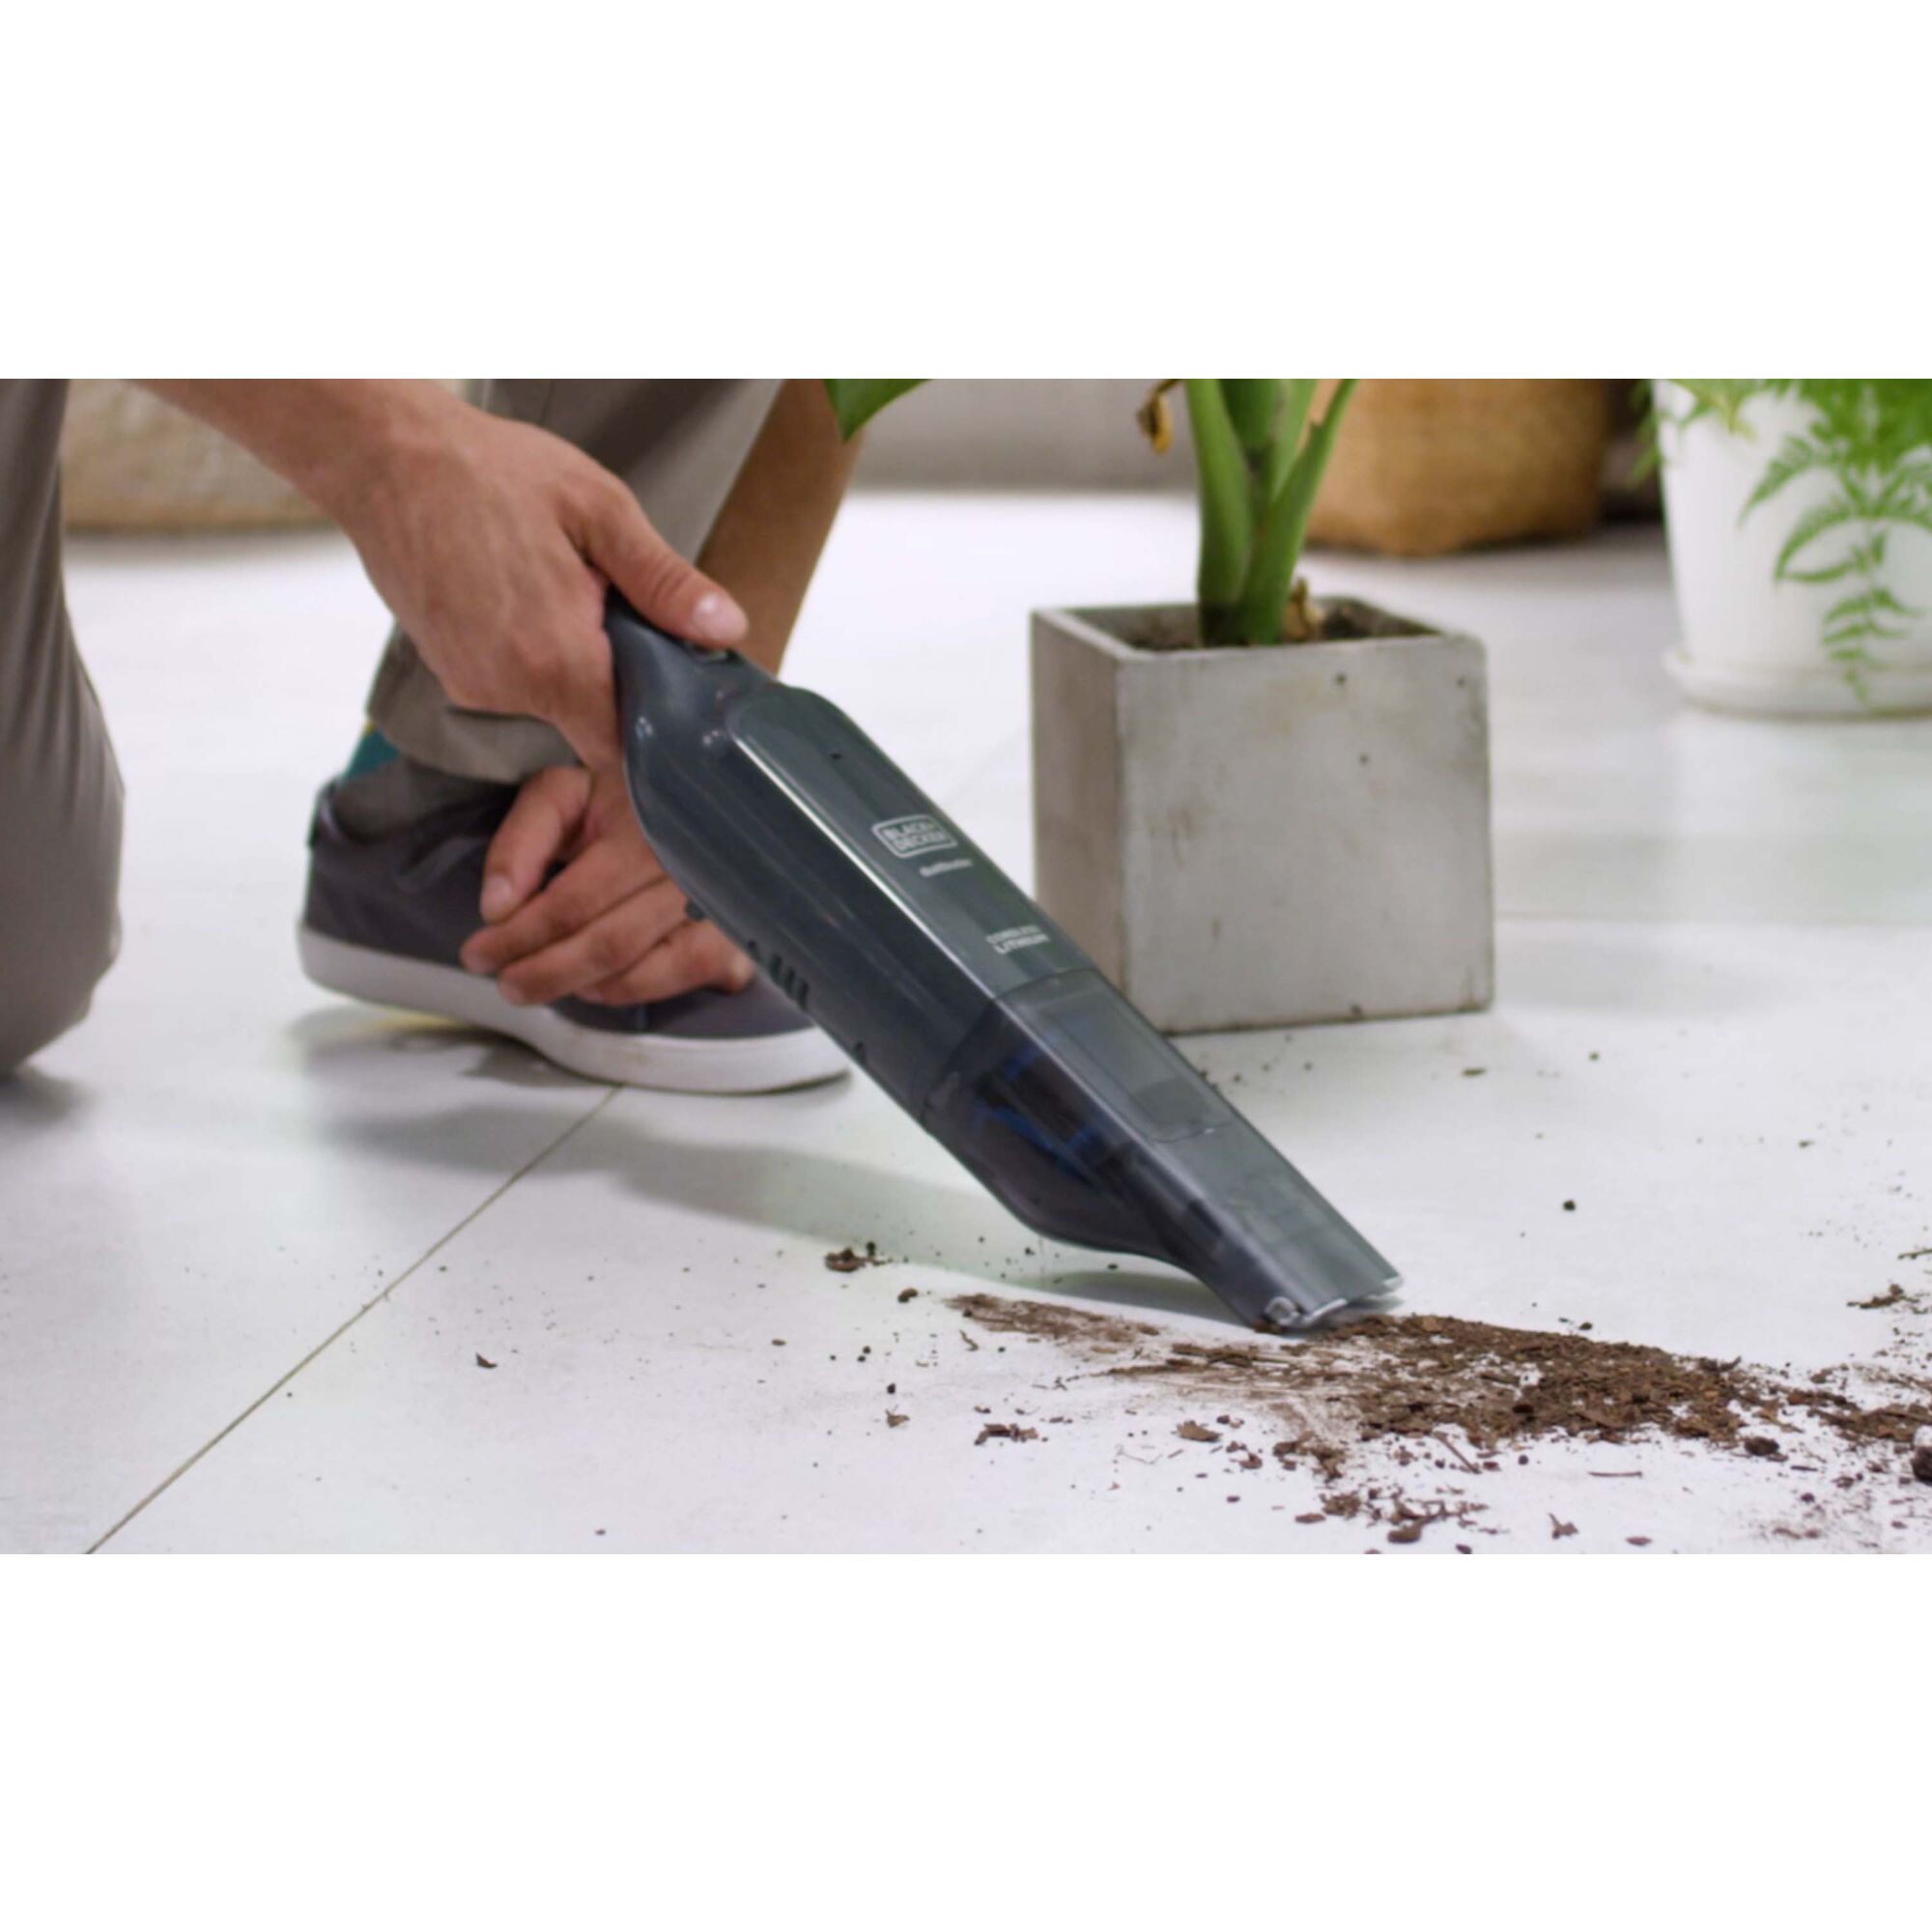 Person cleaning dirt off the tile floor near a freshly potted plant